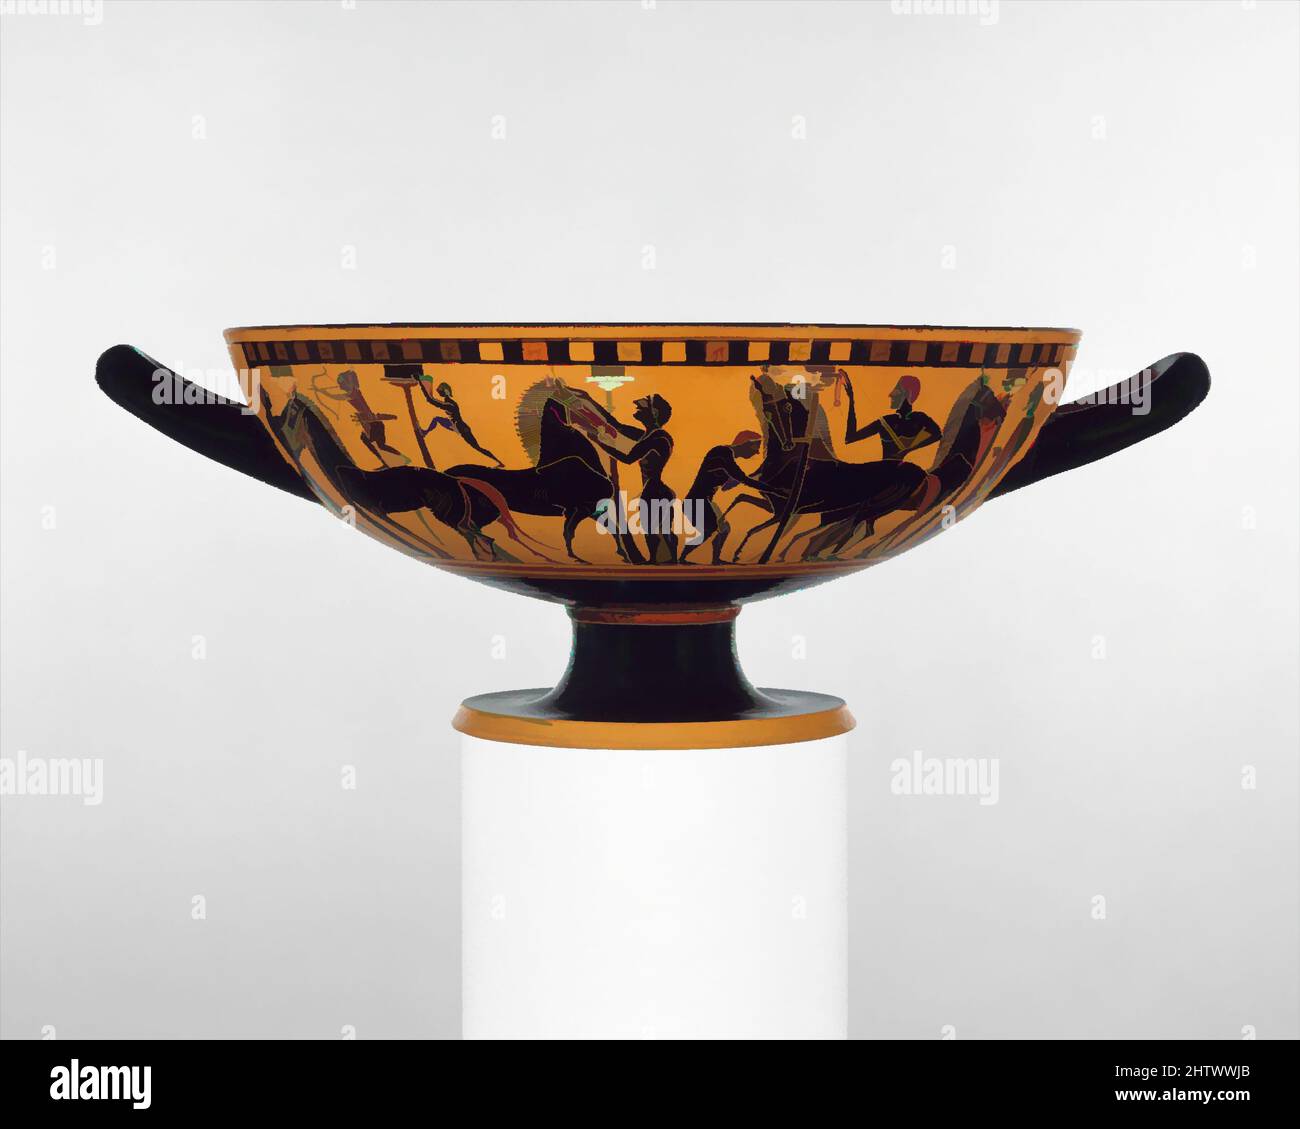 Art inspired by Terracotta kylix (drinking cup), Archaic, ca. 540 B.C., Greek, Attic, Terracotta; black-figure, H. 4 7/8 in. (12.4 cm), Vases, Obverse, Poseidon, the god of the seas, among Greek warriors, Reverse, the stables of Poseidon. The subjects are drawn from book 13 of Homer's, Classic works modernized by Artotop with a splash of modernity. Shapes, color and value, eye-catching visual impact on art. Emotions through freedom of artworks in a contemporary way. A timeless message pursuing a wildly creative new direction. Artists turning to the digital medium and creating the Artotop NFT Stock Photo